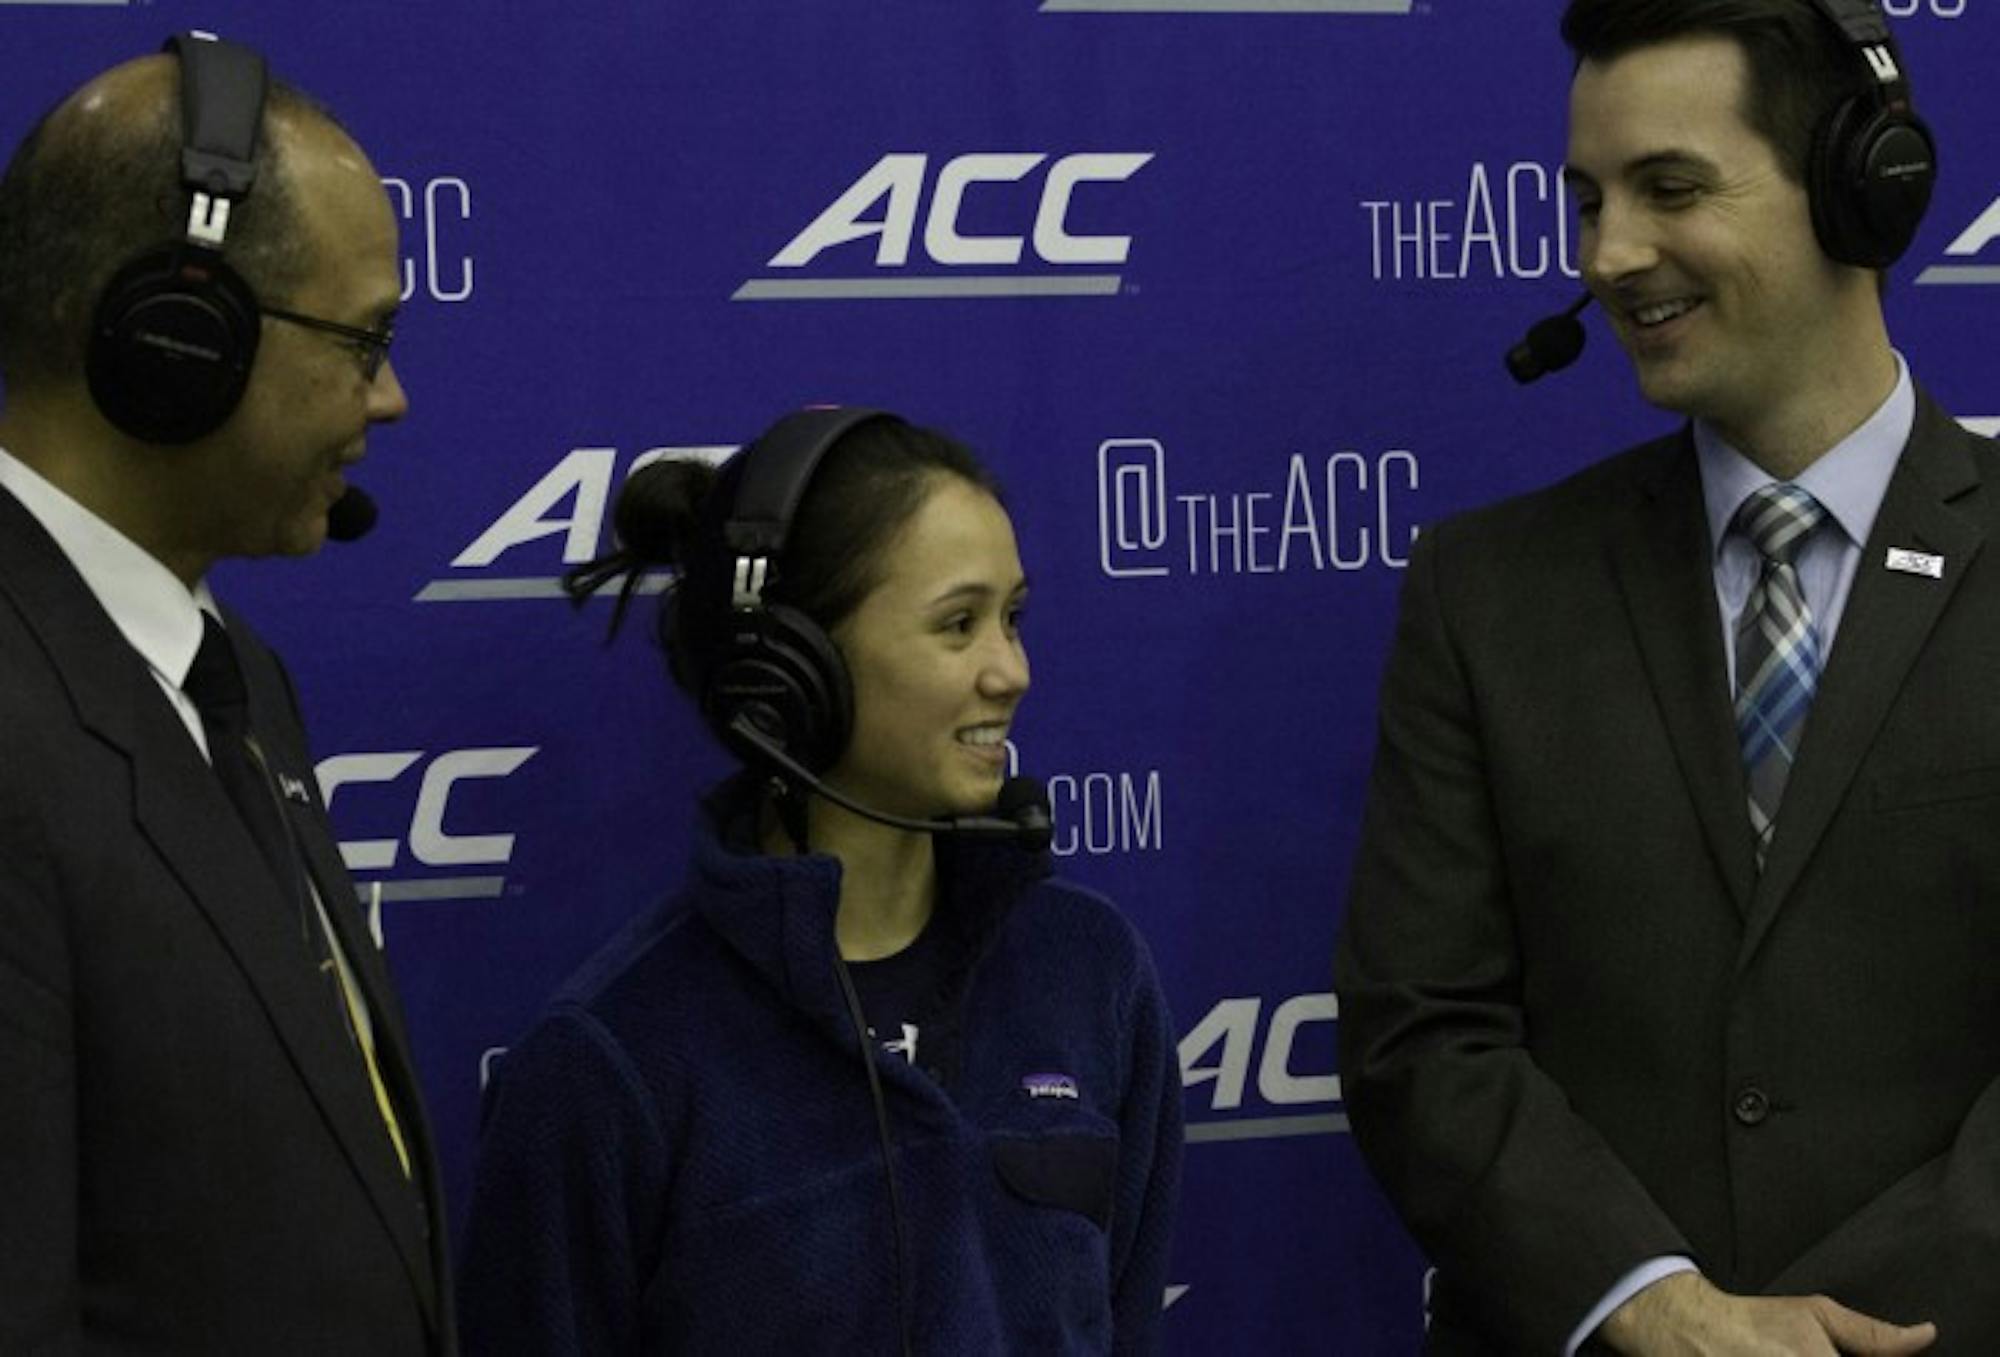 Notre Dame senior fencer Lee Kiefer is interviewed at the ACC Championships at Castellan Family Fencing Center on Feb. 28, 2016.